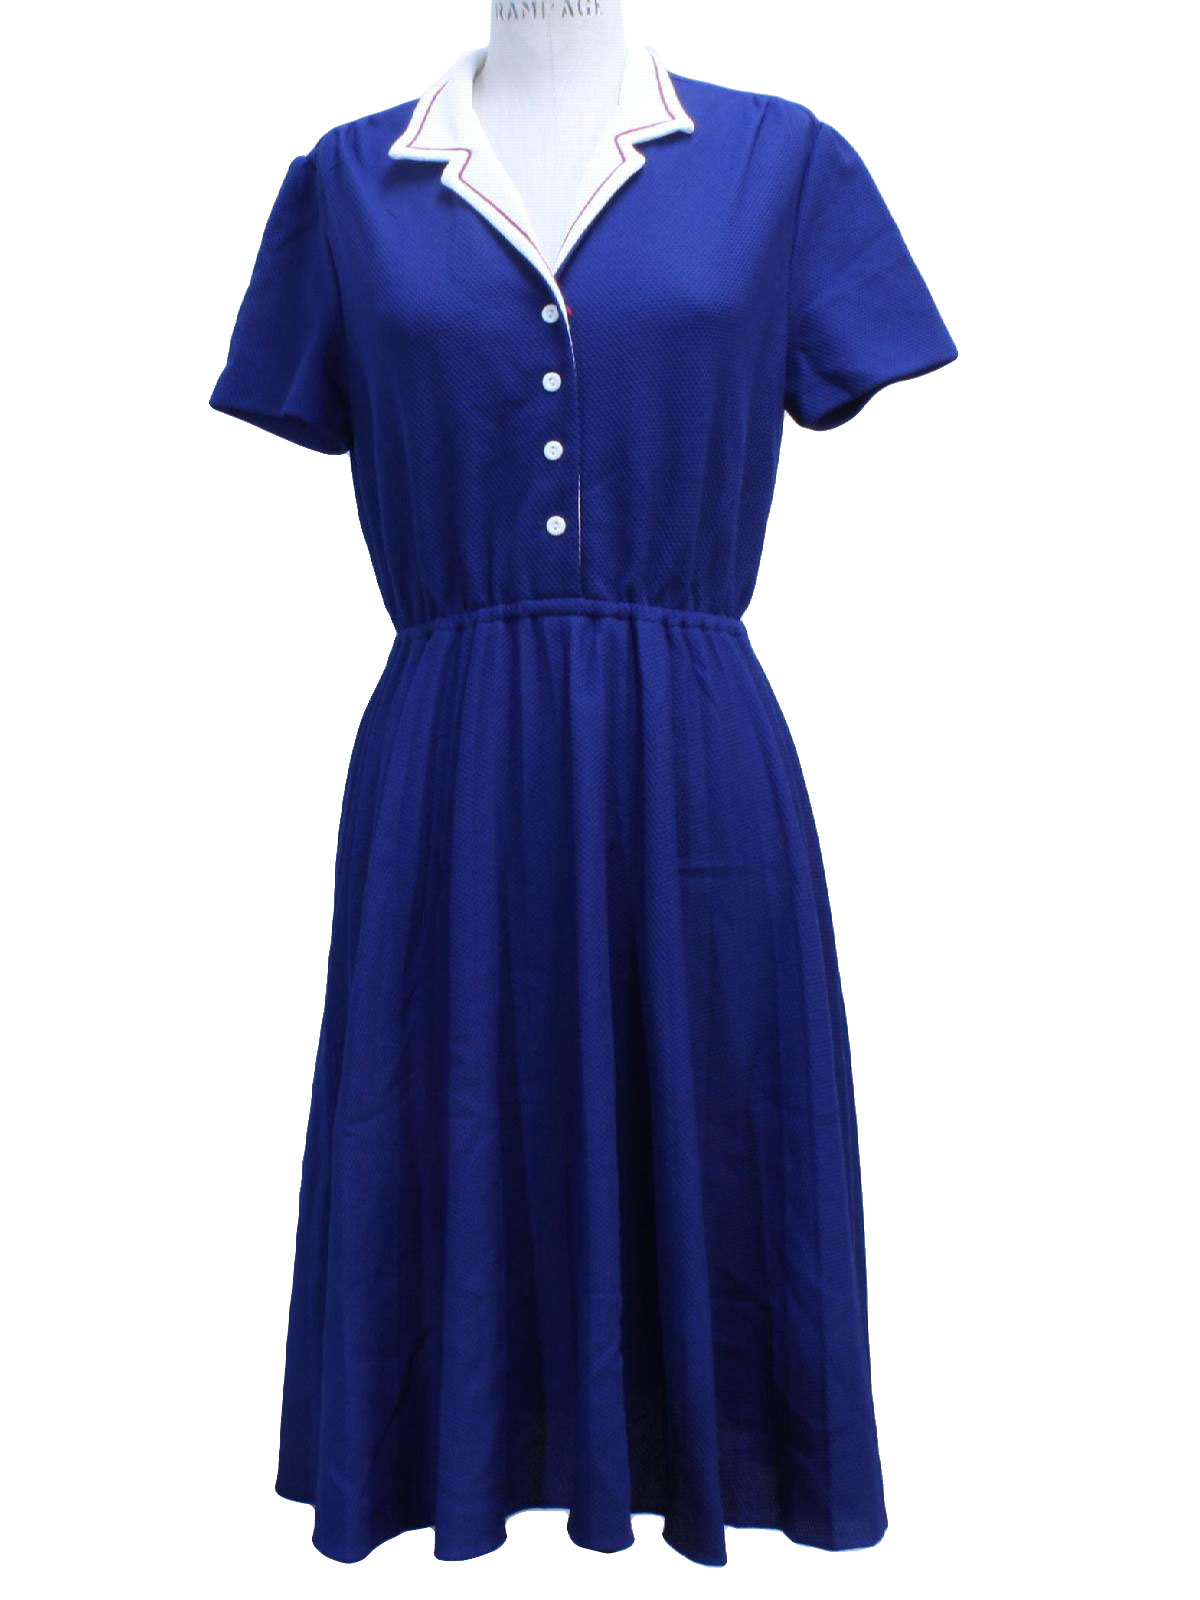 Vintage 1960's Dress: 60s -Monica Richards- Womens navy blue, white and ...